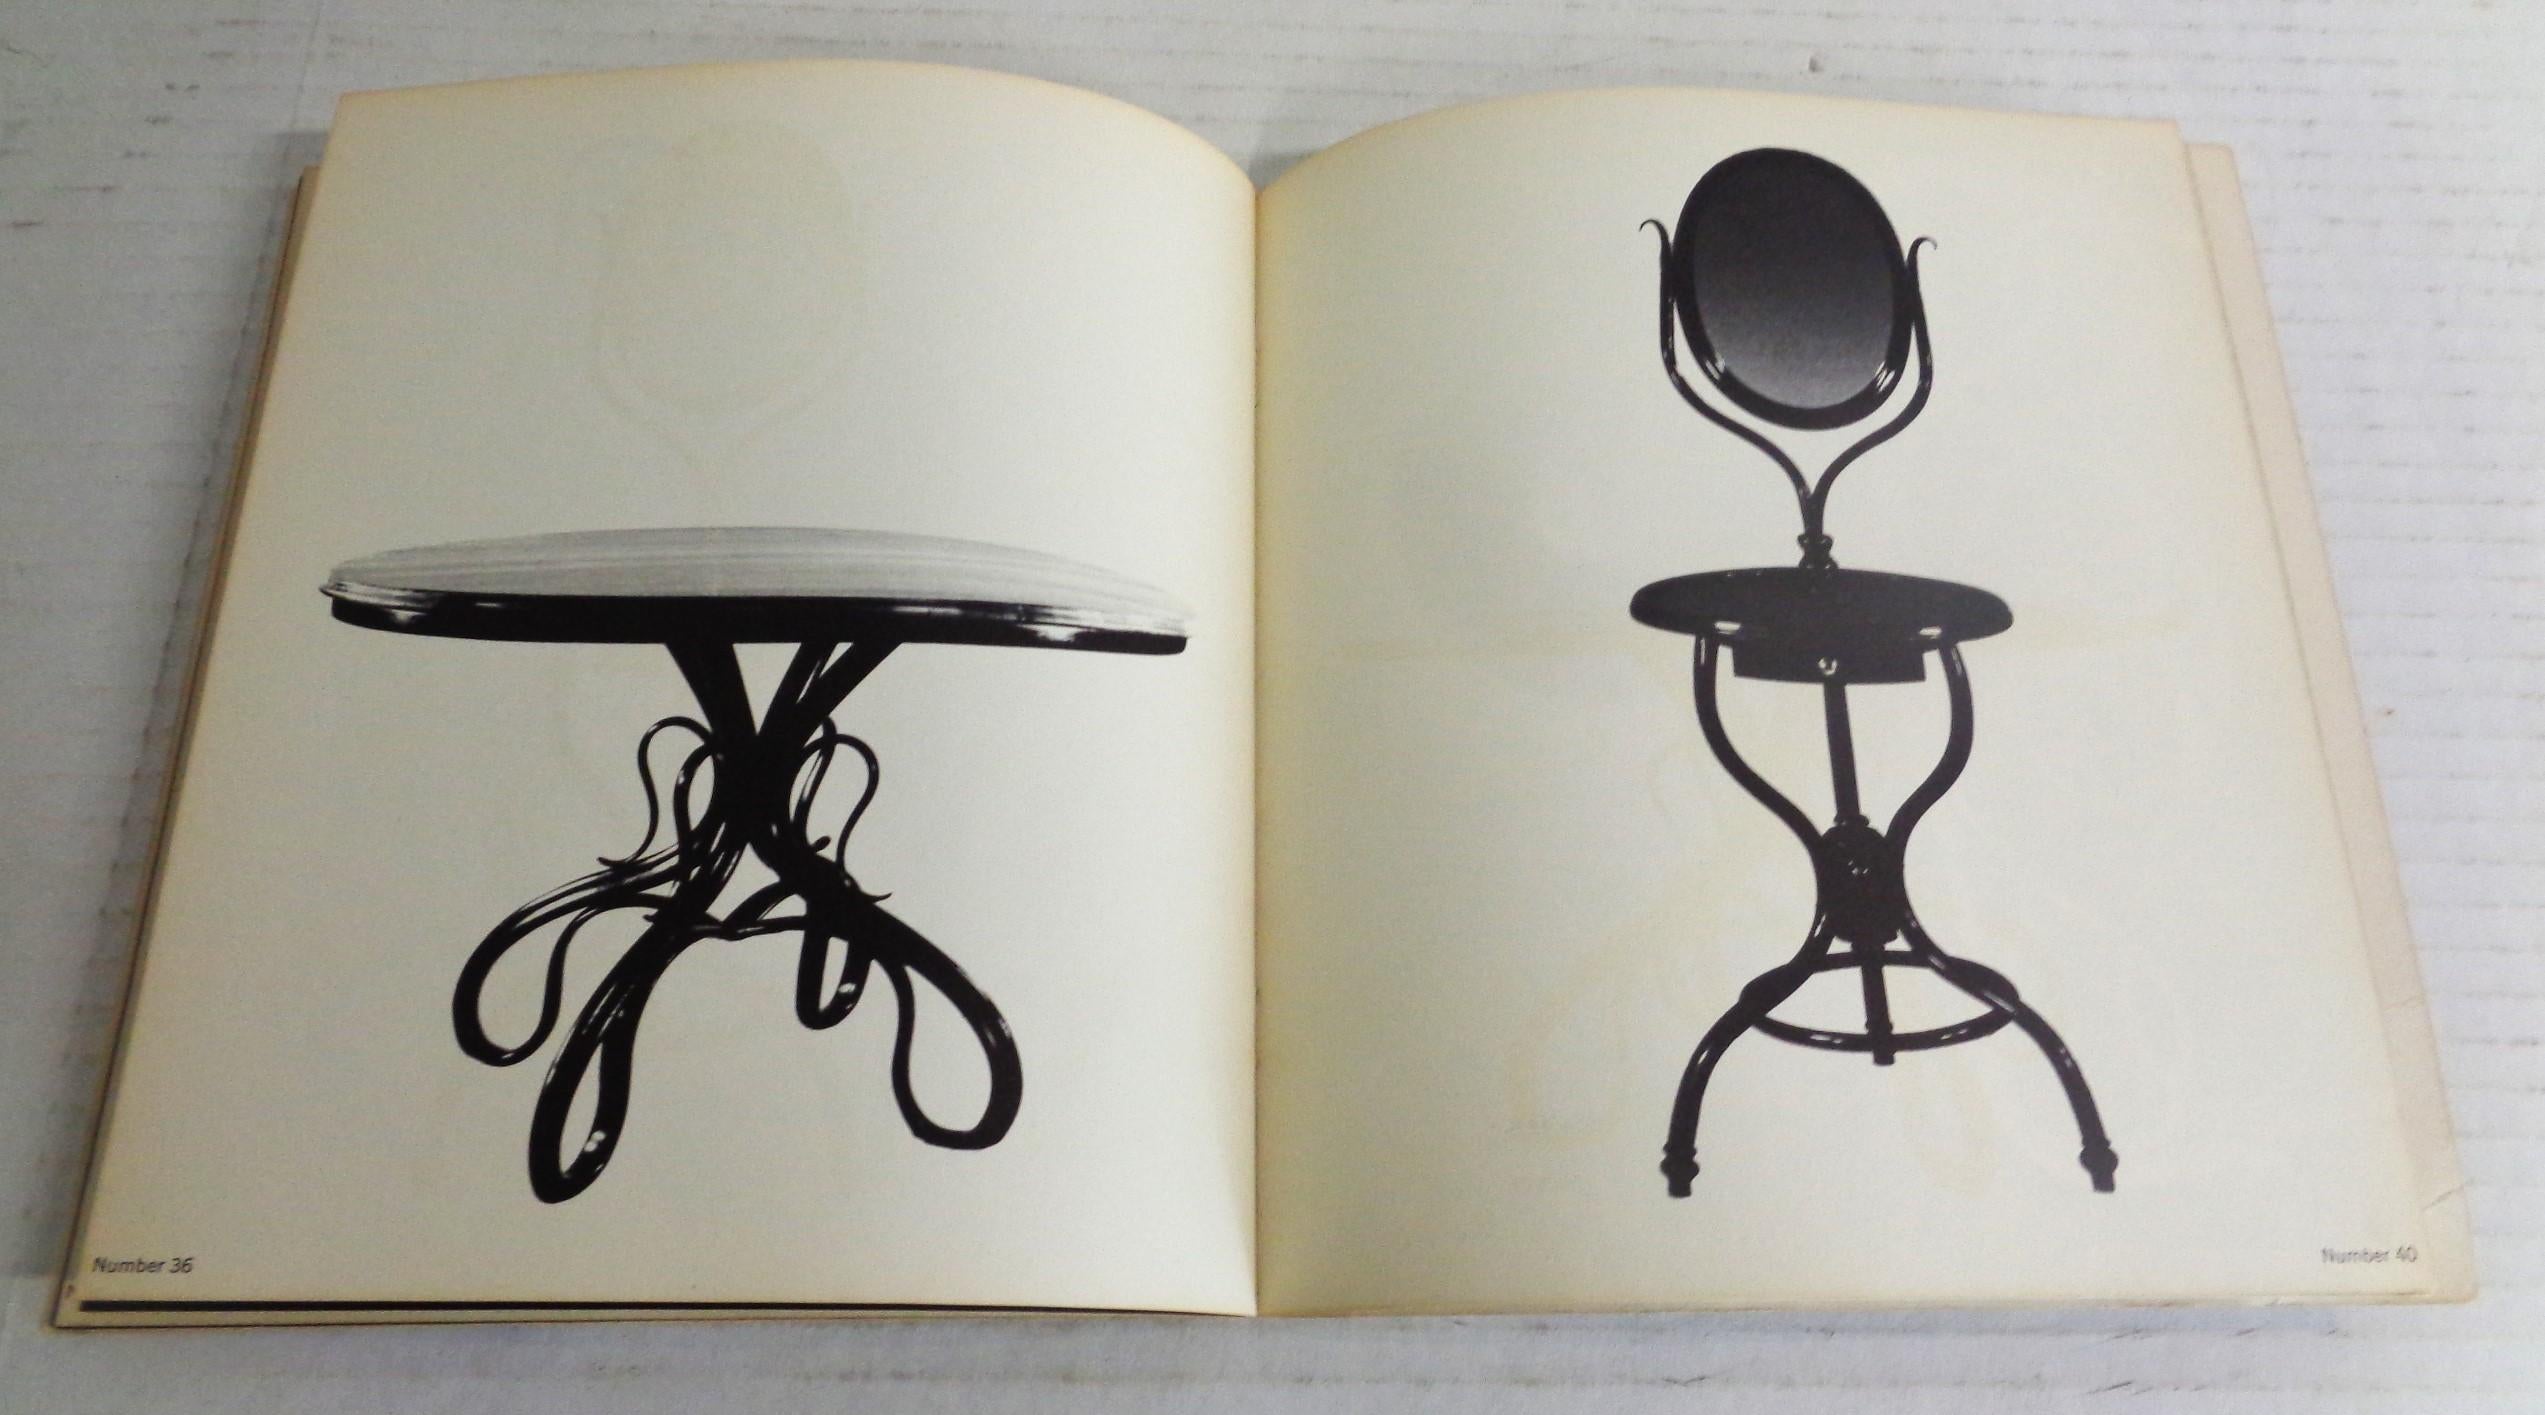 Thonet 19th C. Bentwood Furniture - UCLA Art Galleries Exhibition Catalog 1961 For Sale 3